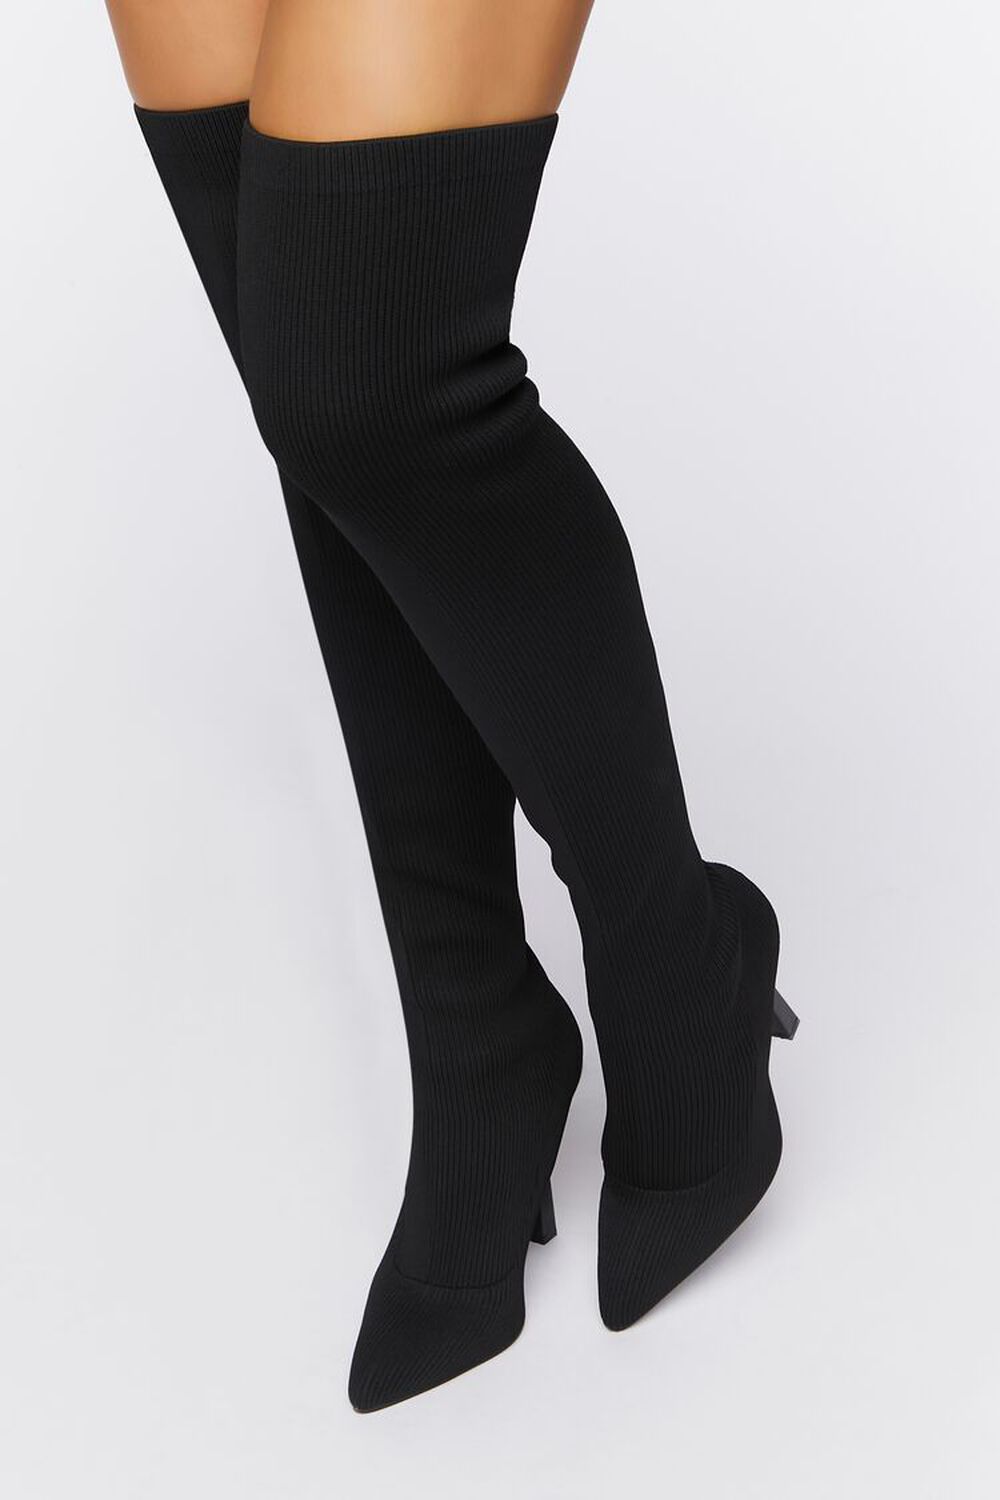 BLACK Over-the-Knee Sock Boots, image 1